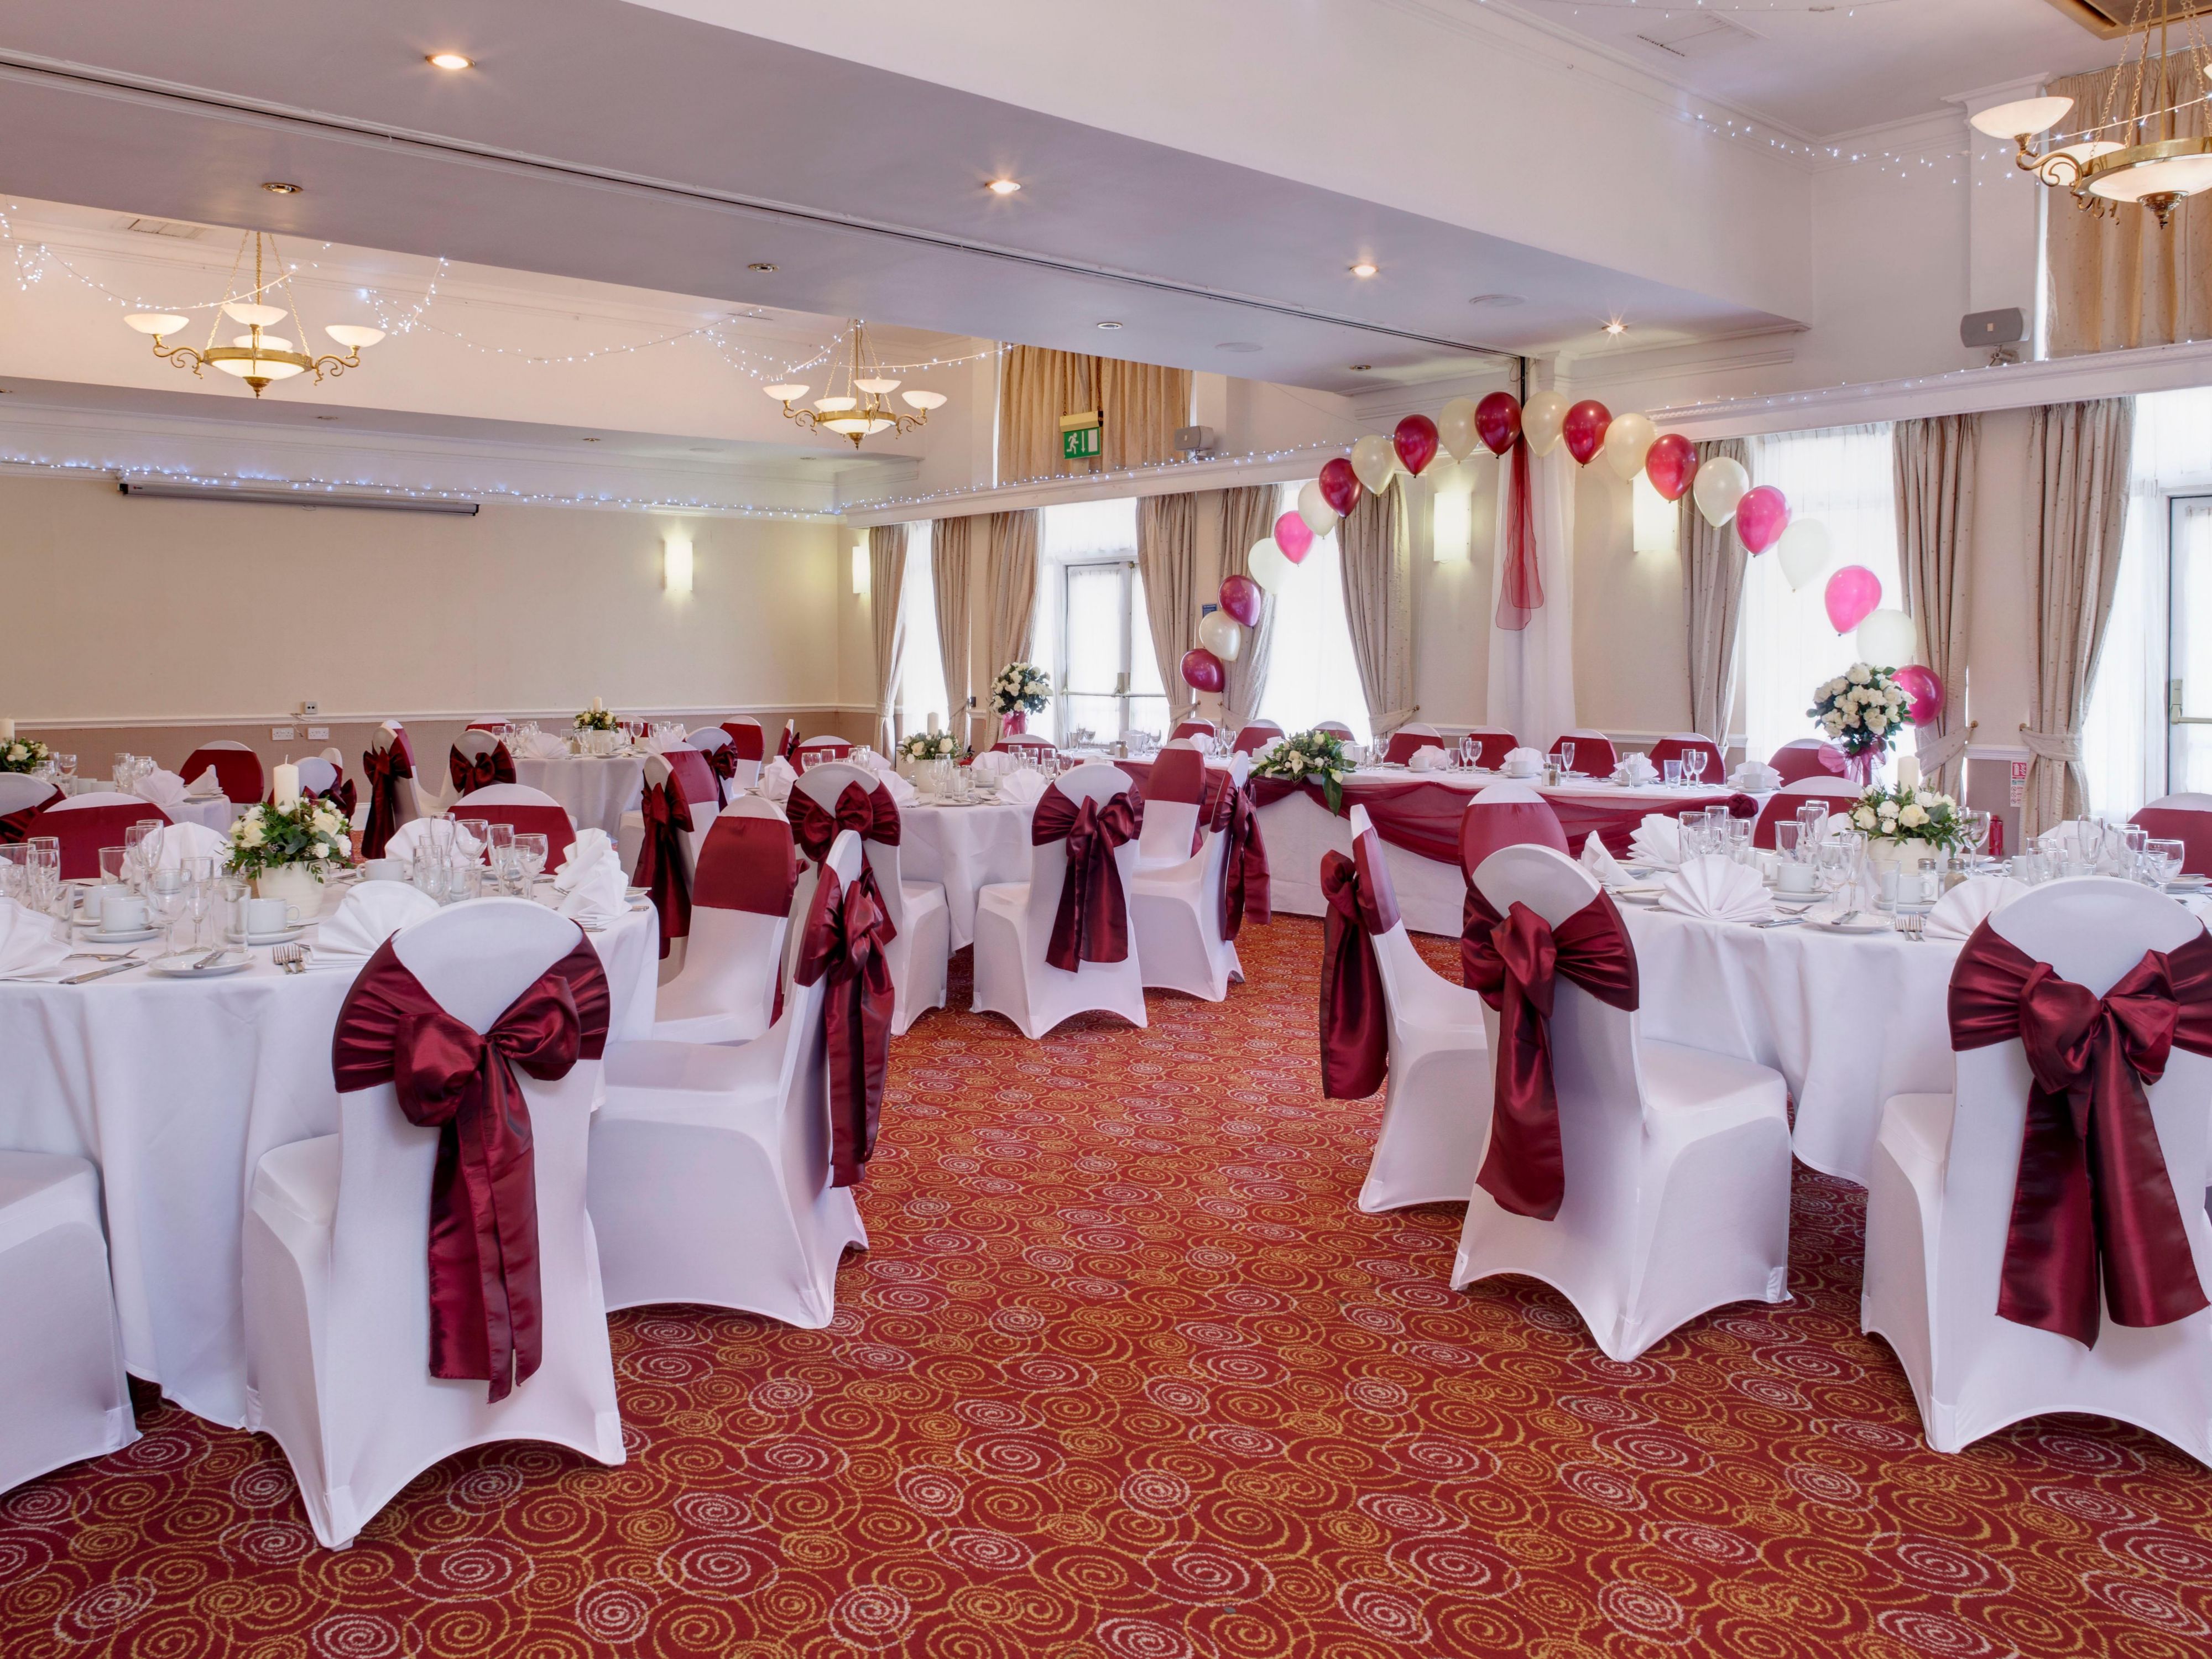 For that special day, we are with you every step of the way, guiding you through those initial questions and requests through to ensure everything runs smoothly and stress-free on the big day. Our function suites are versatile and are the perfect location to create your own personalised ambience and perfectly tailored day for you.